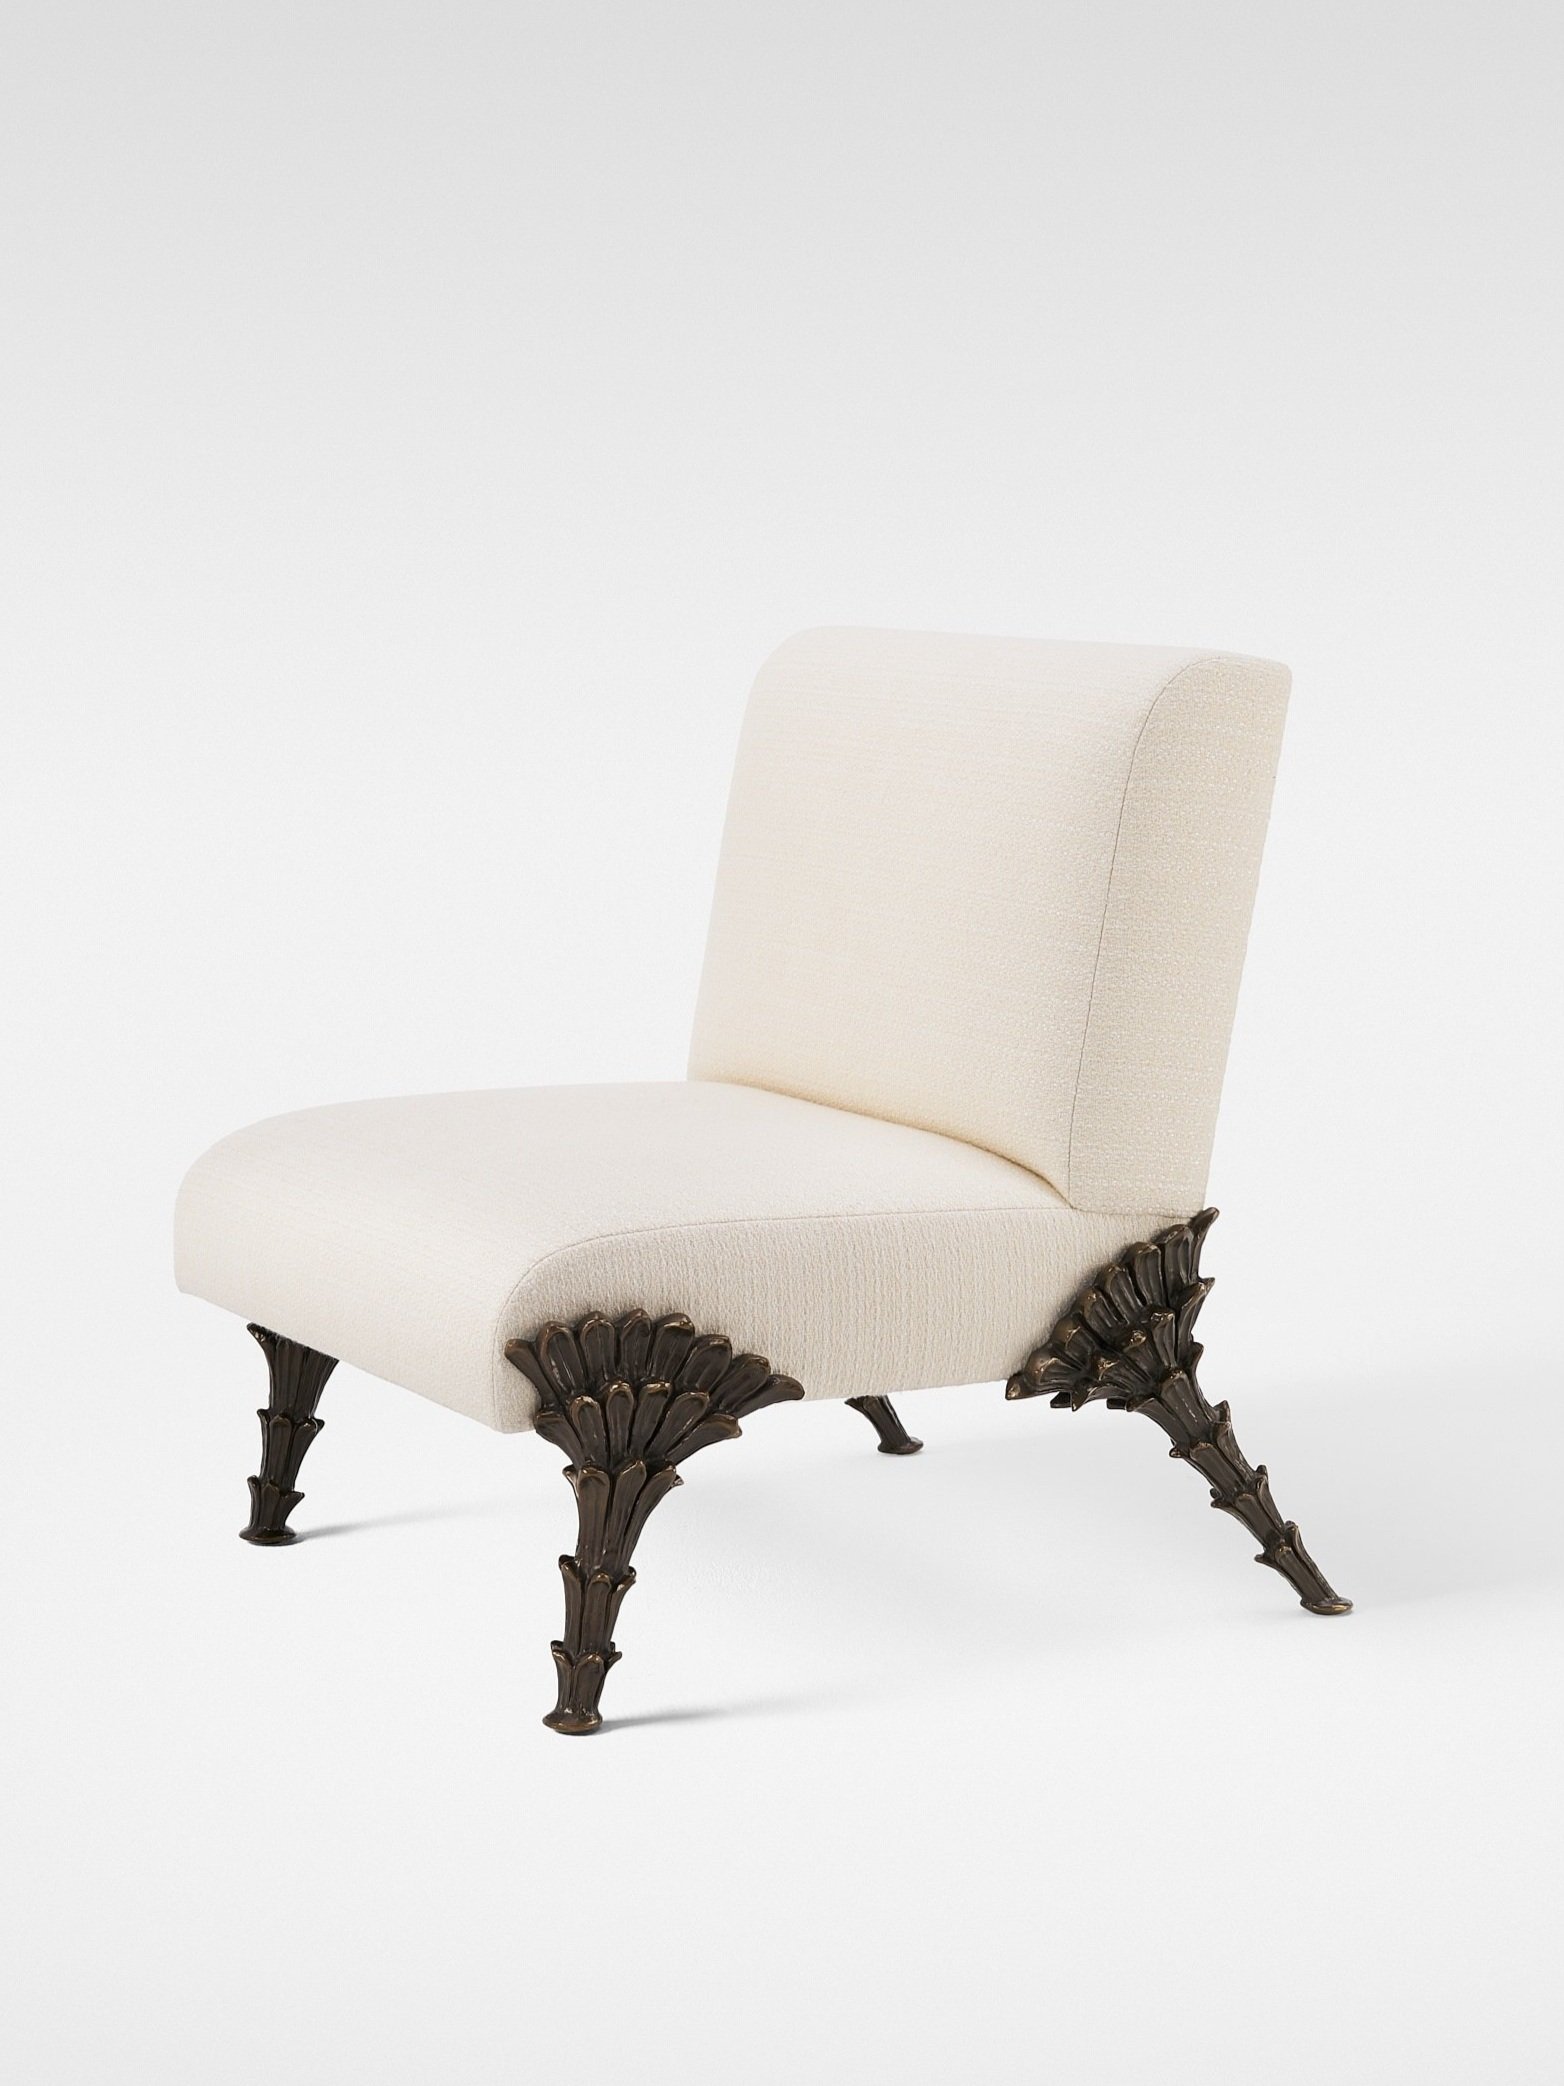 Francis Sultana, Lounge Chair 'Patrice'